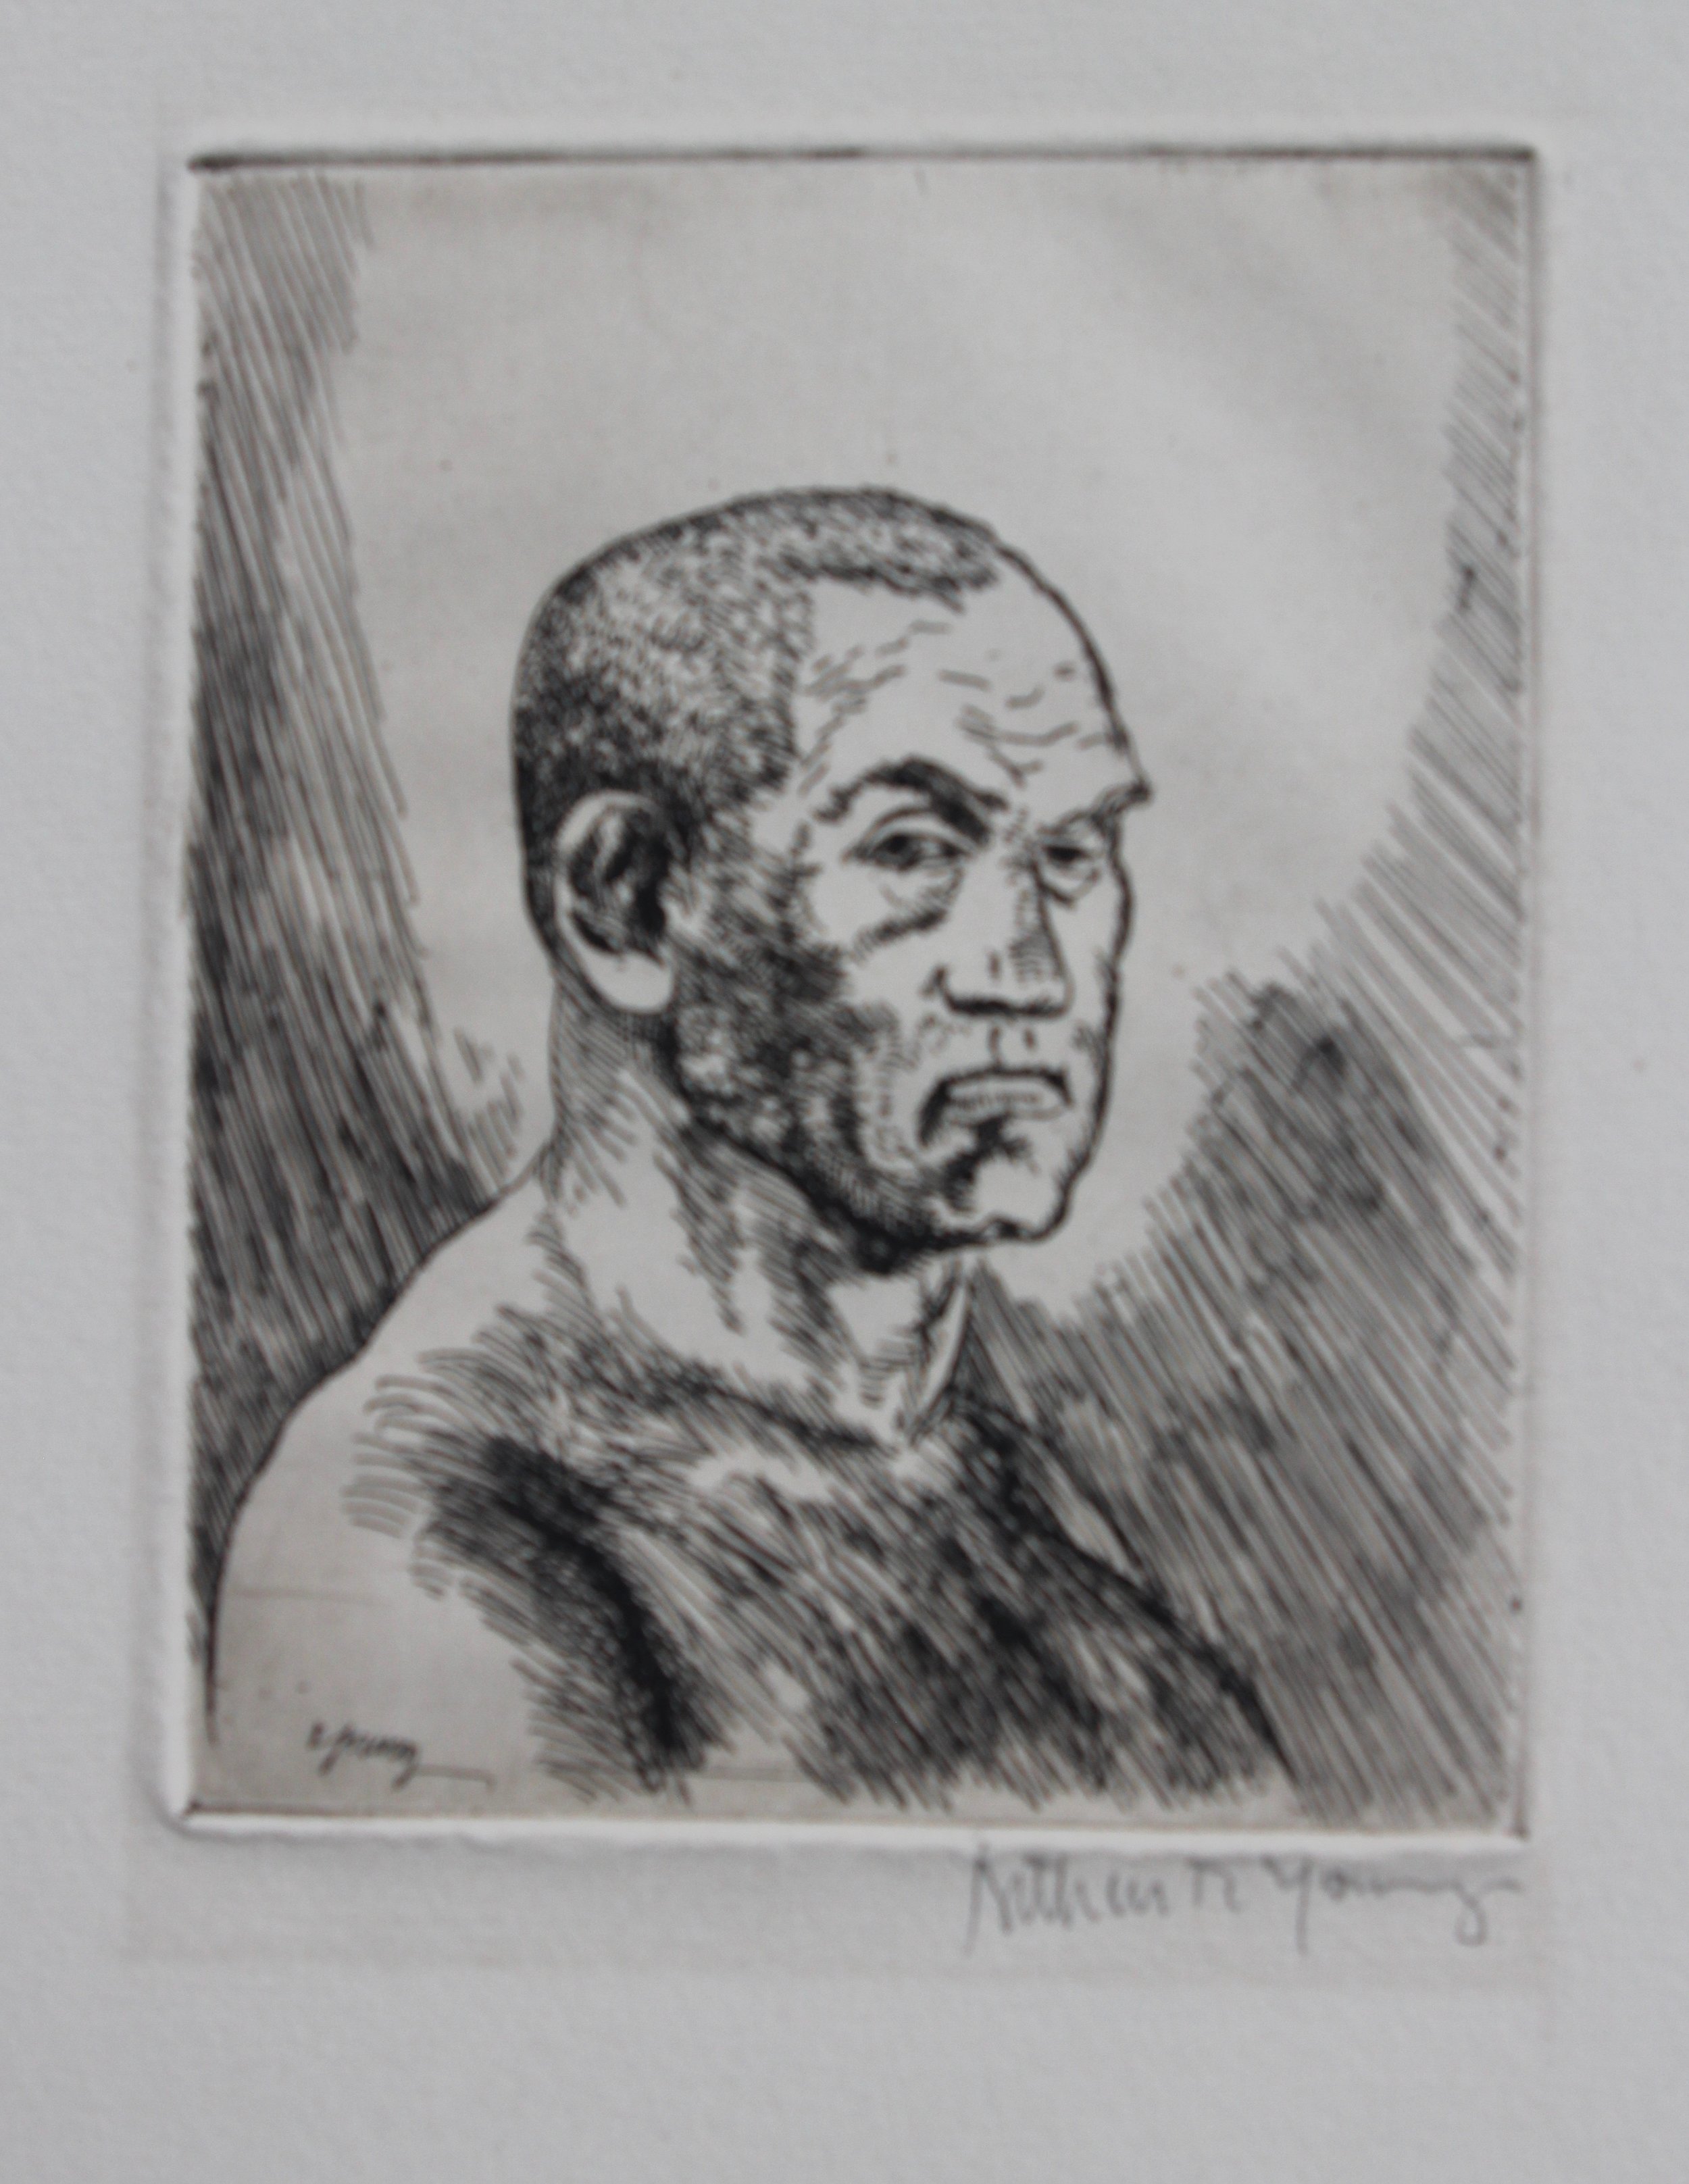 Arthur R. Young, Untitled (boxer), c. 1920